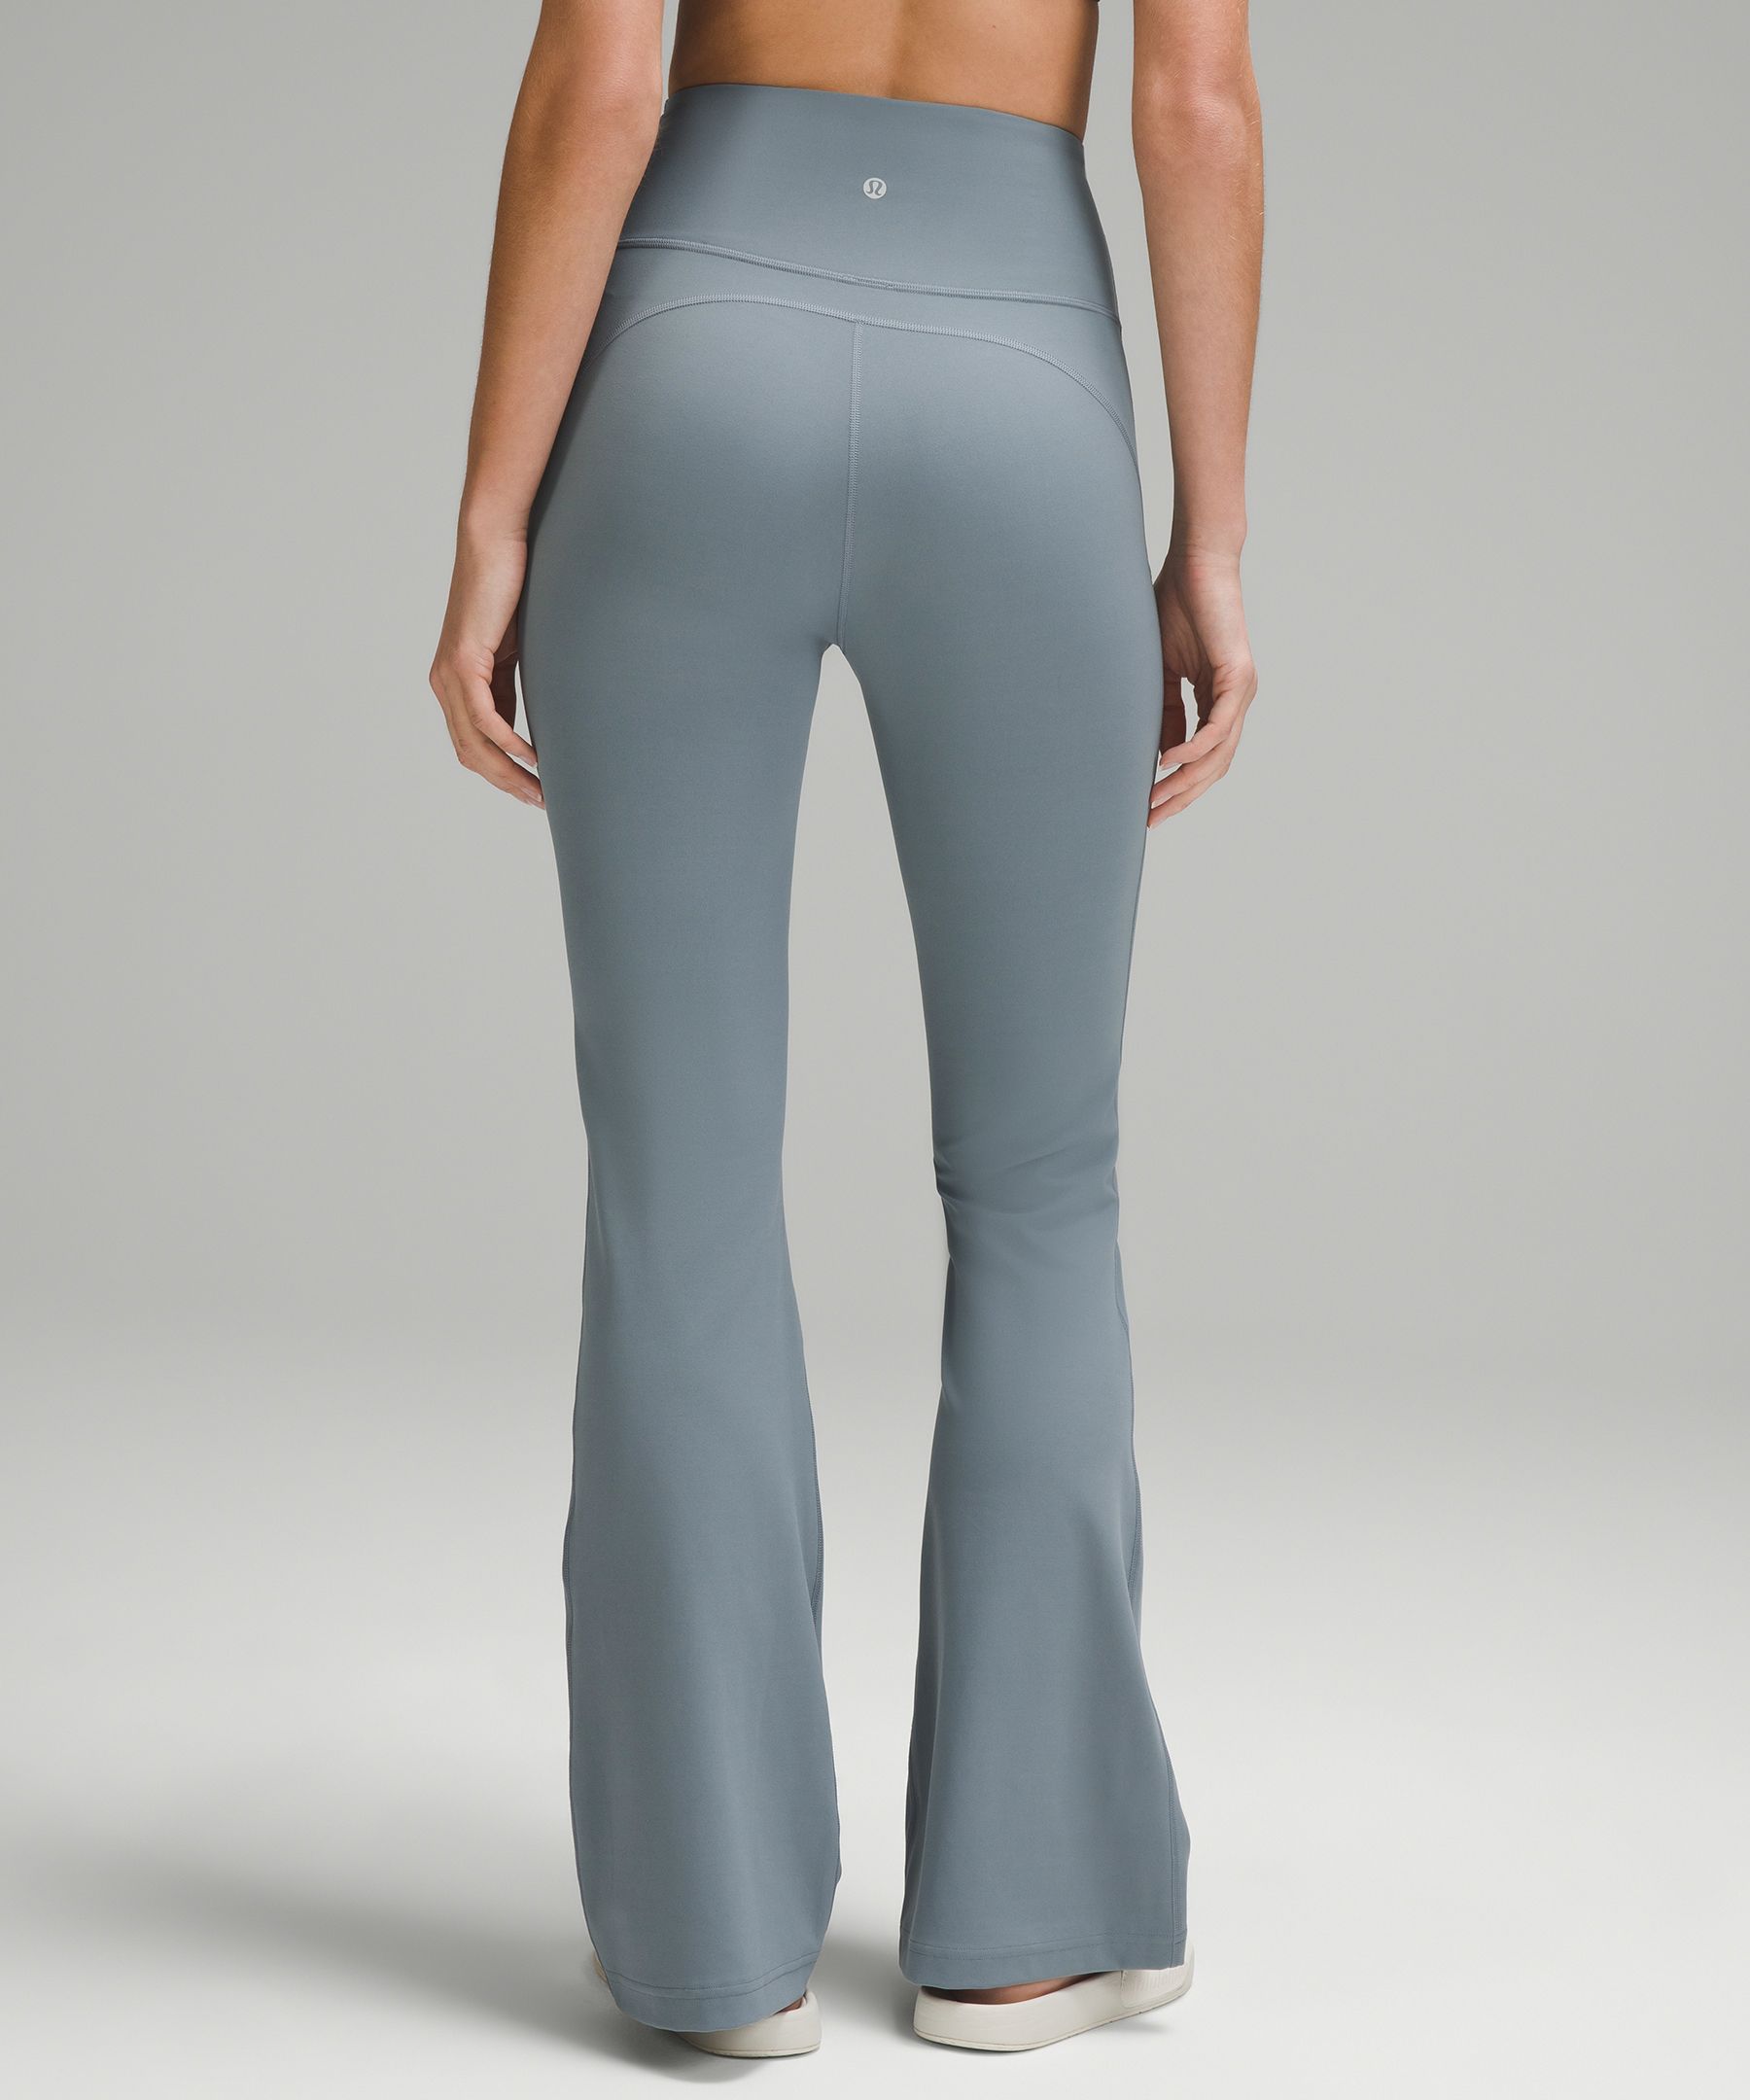 Groove Pant Super High-Rise Flare *Nulu, graphite grey